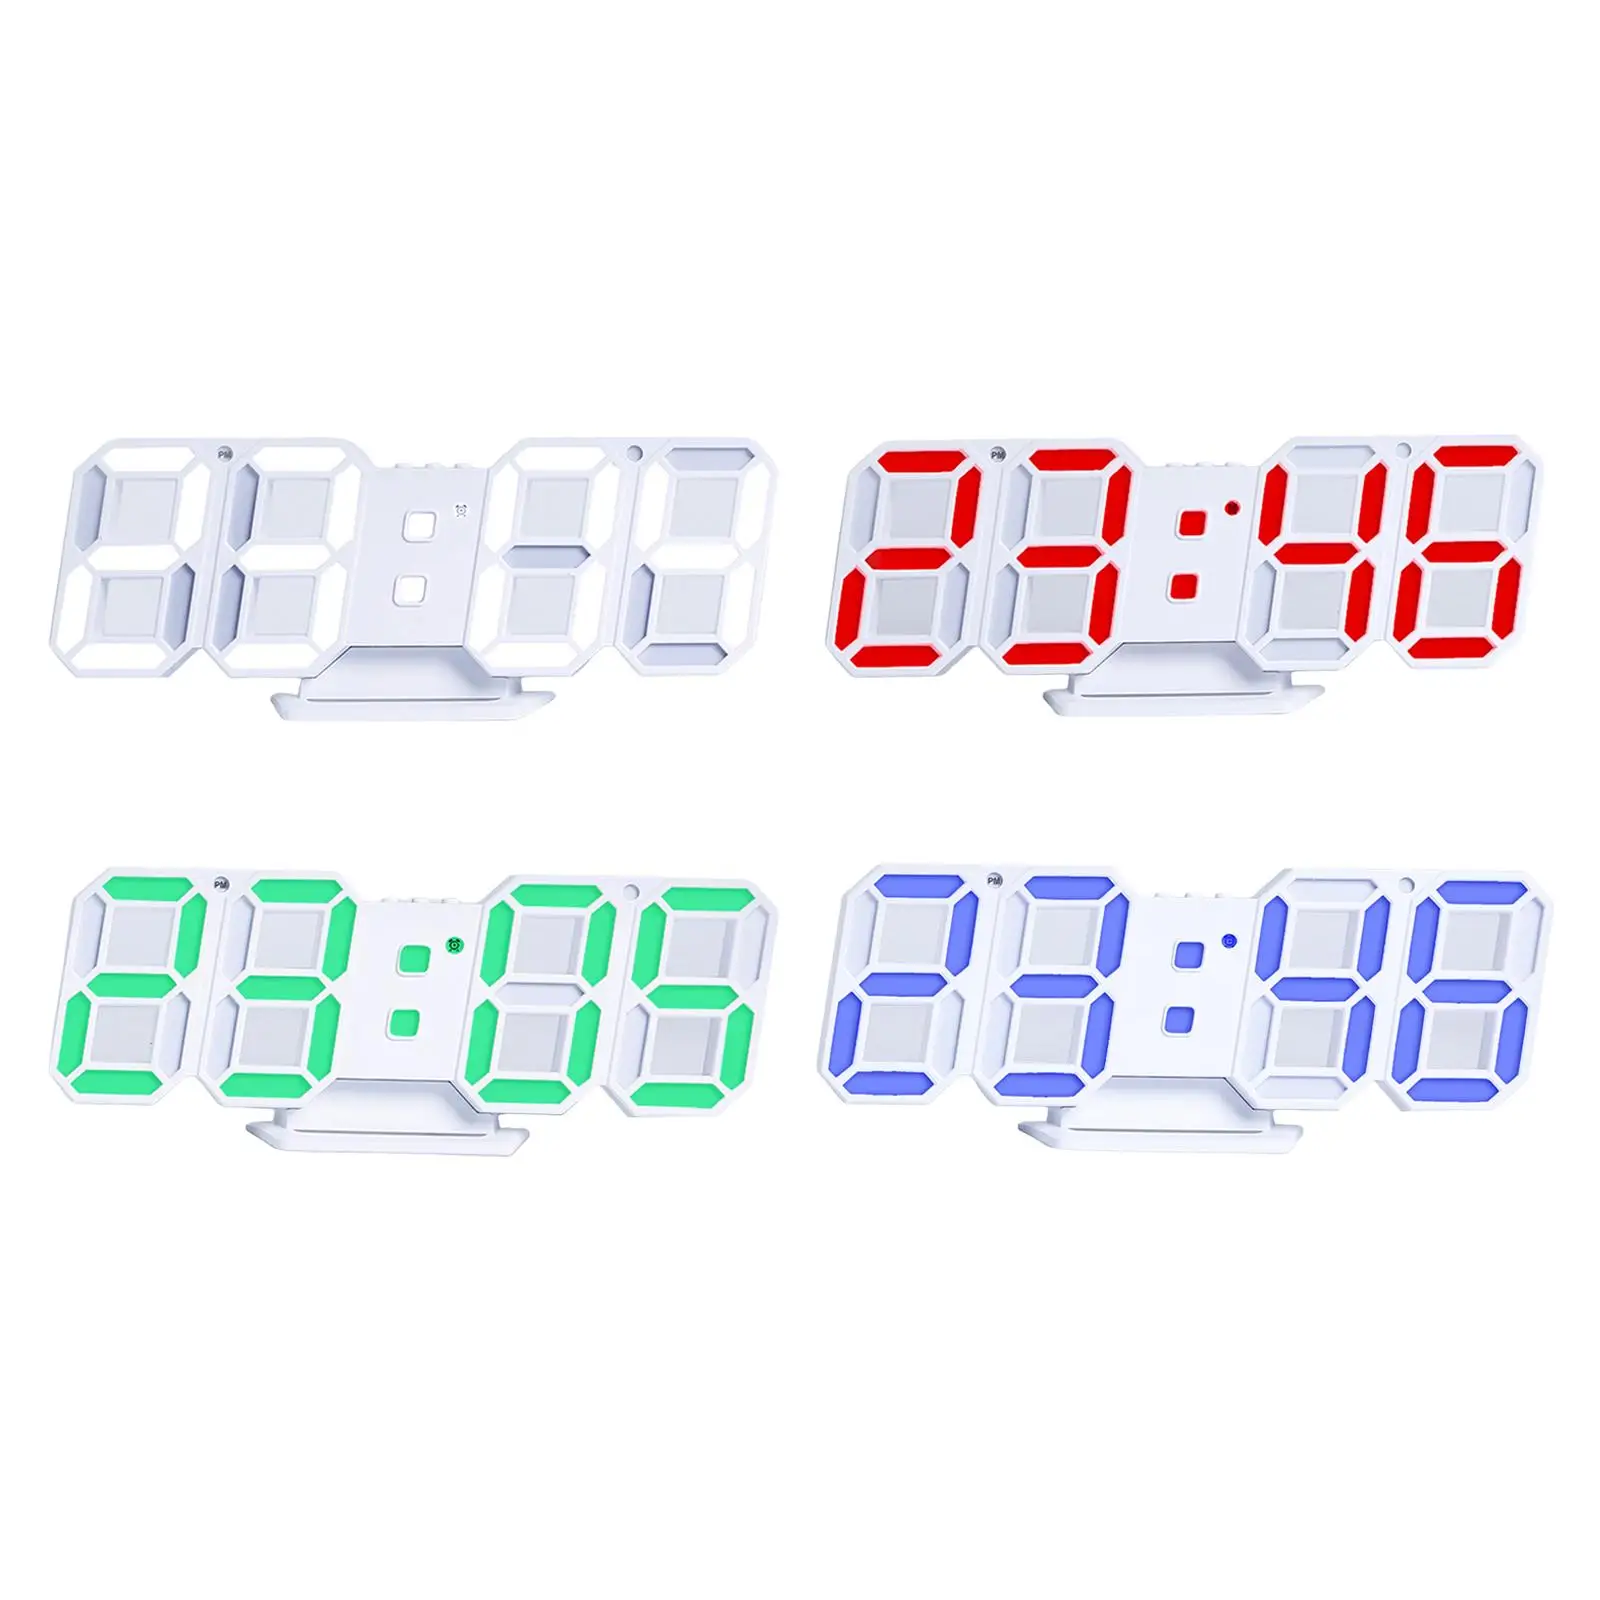 Alarm Clock with USB Table Electronic Calendar Desk Clock Large LCD Display Alarm Clock with USB Port for Home Birthday Gifts